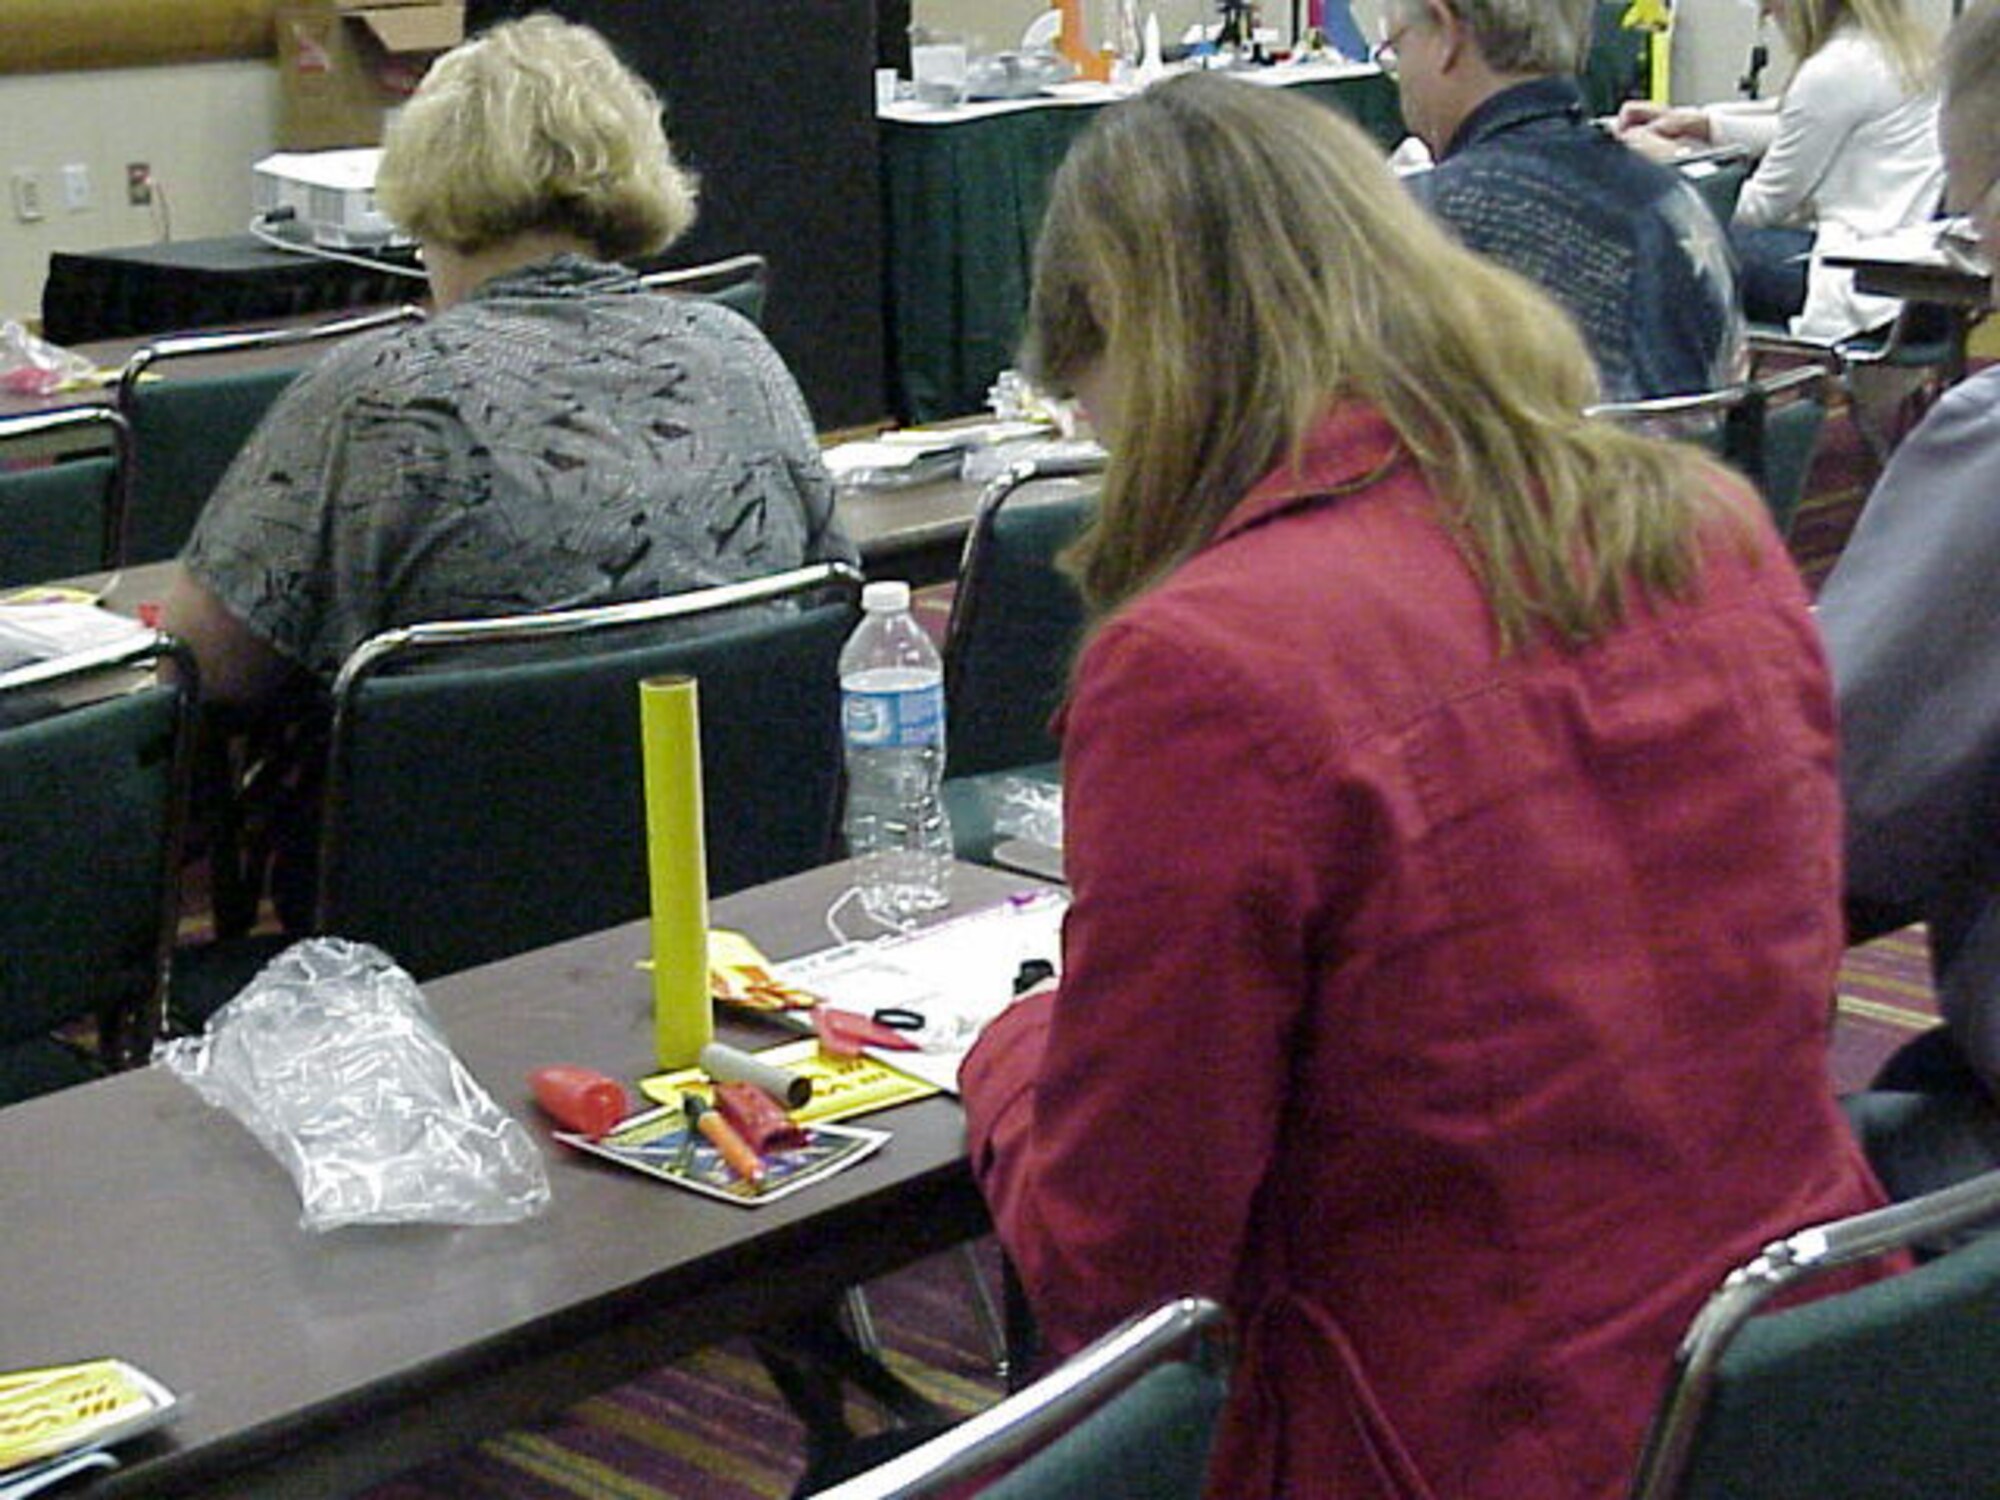 Teachers from across the nation build rockets during Cindy Henry’s presentation “Launch into STEM with Model Rocketry” during the National Science Teachers Association Conference in Indianapolis. (U.S. Air Force photo)